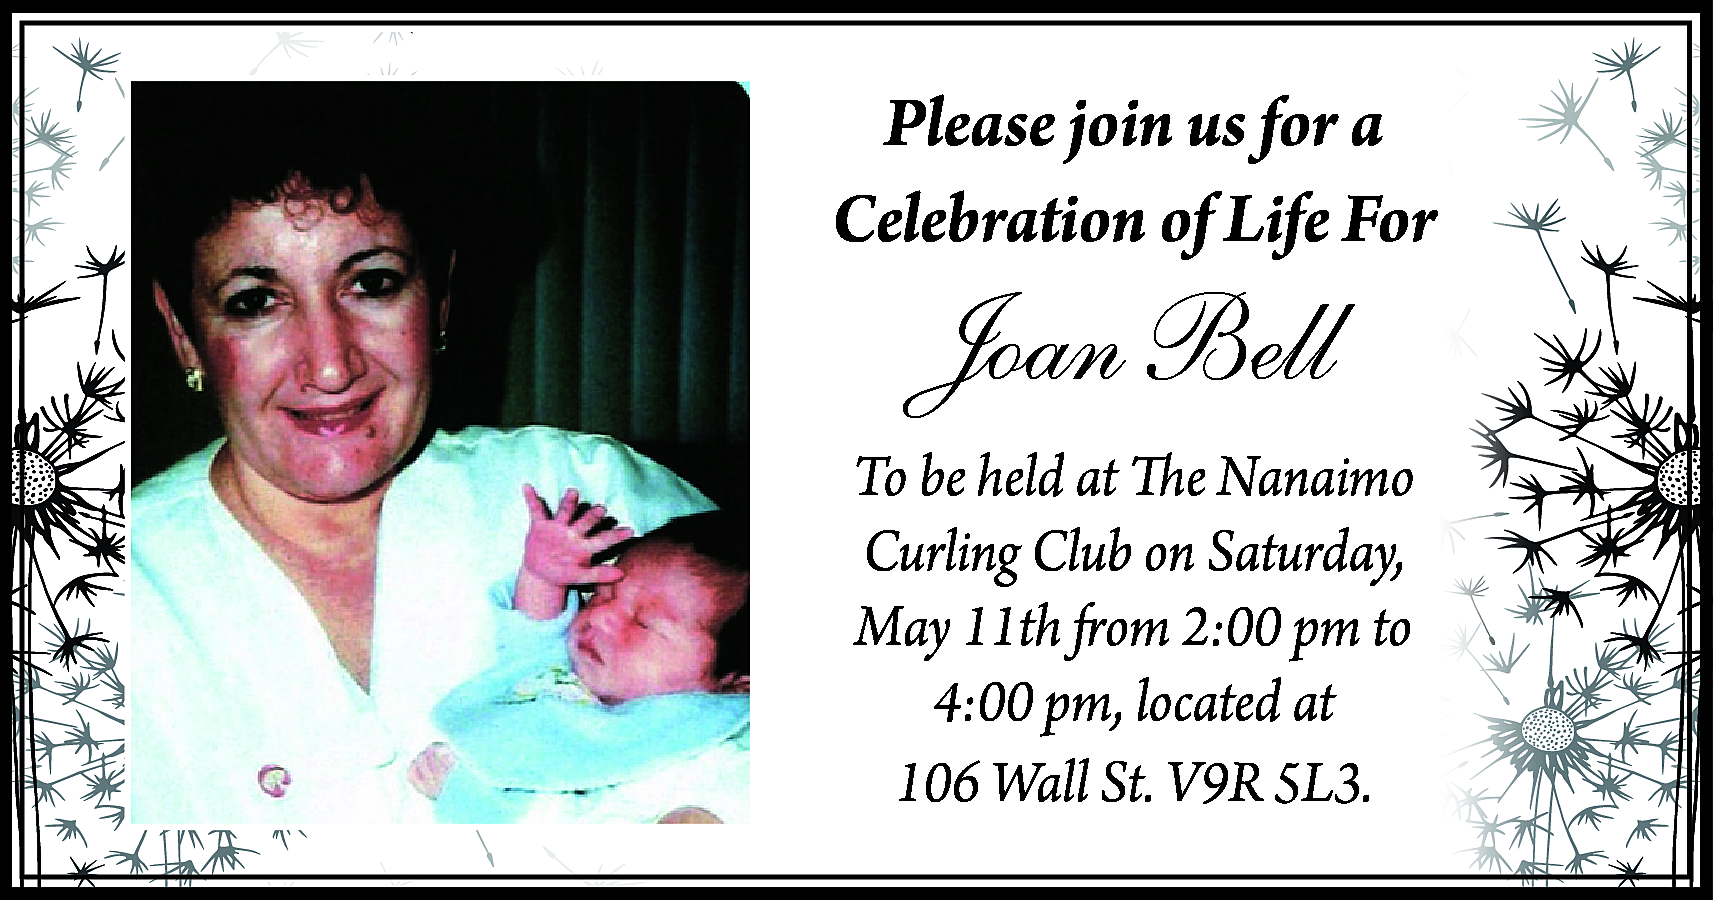 Please join us for a  Please join us for a  Celebration of Life For    Joan Bell    To be held at The Nanaimo  Curling Club on Saturday,  May 11th from 2:00 pm to  4:00 pm, located at  106 Wall St. V9R 5L3.    